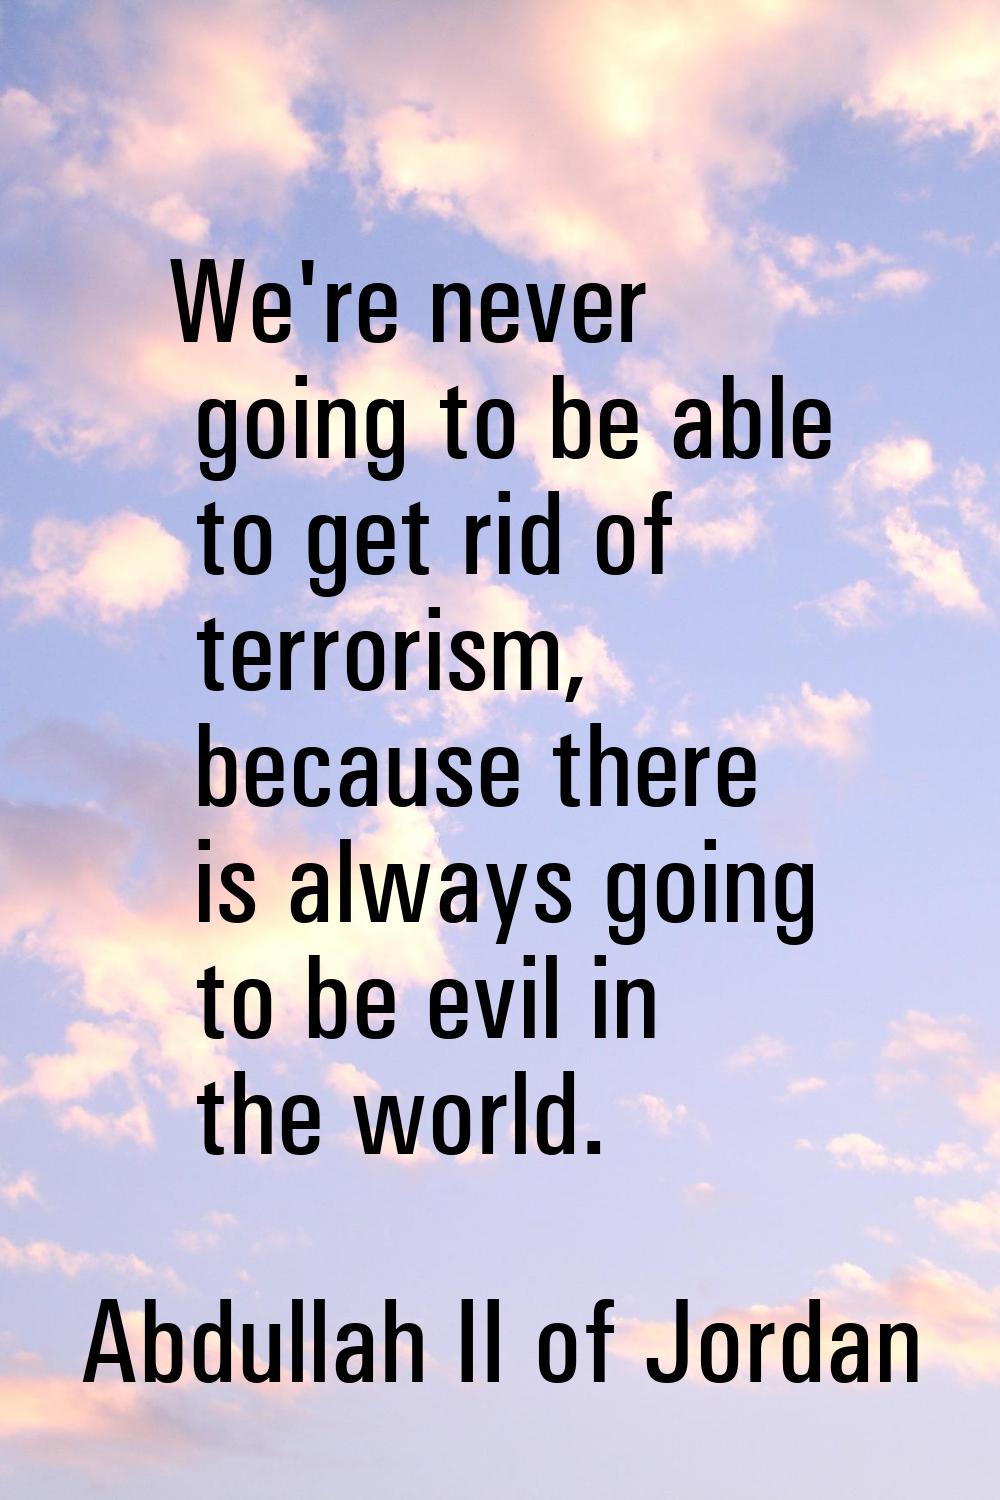 We're never going to be able to get rid of terrorism, because there is always going to be evil in t